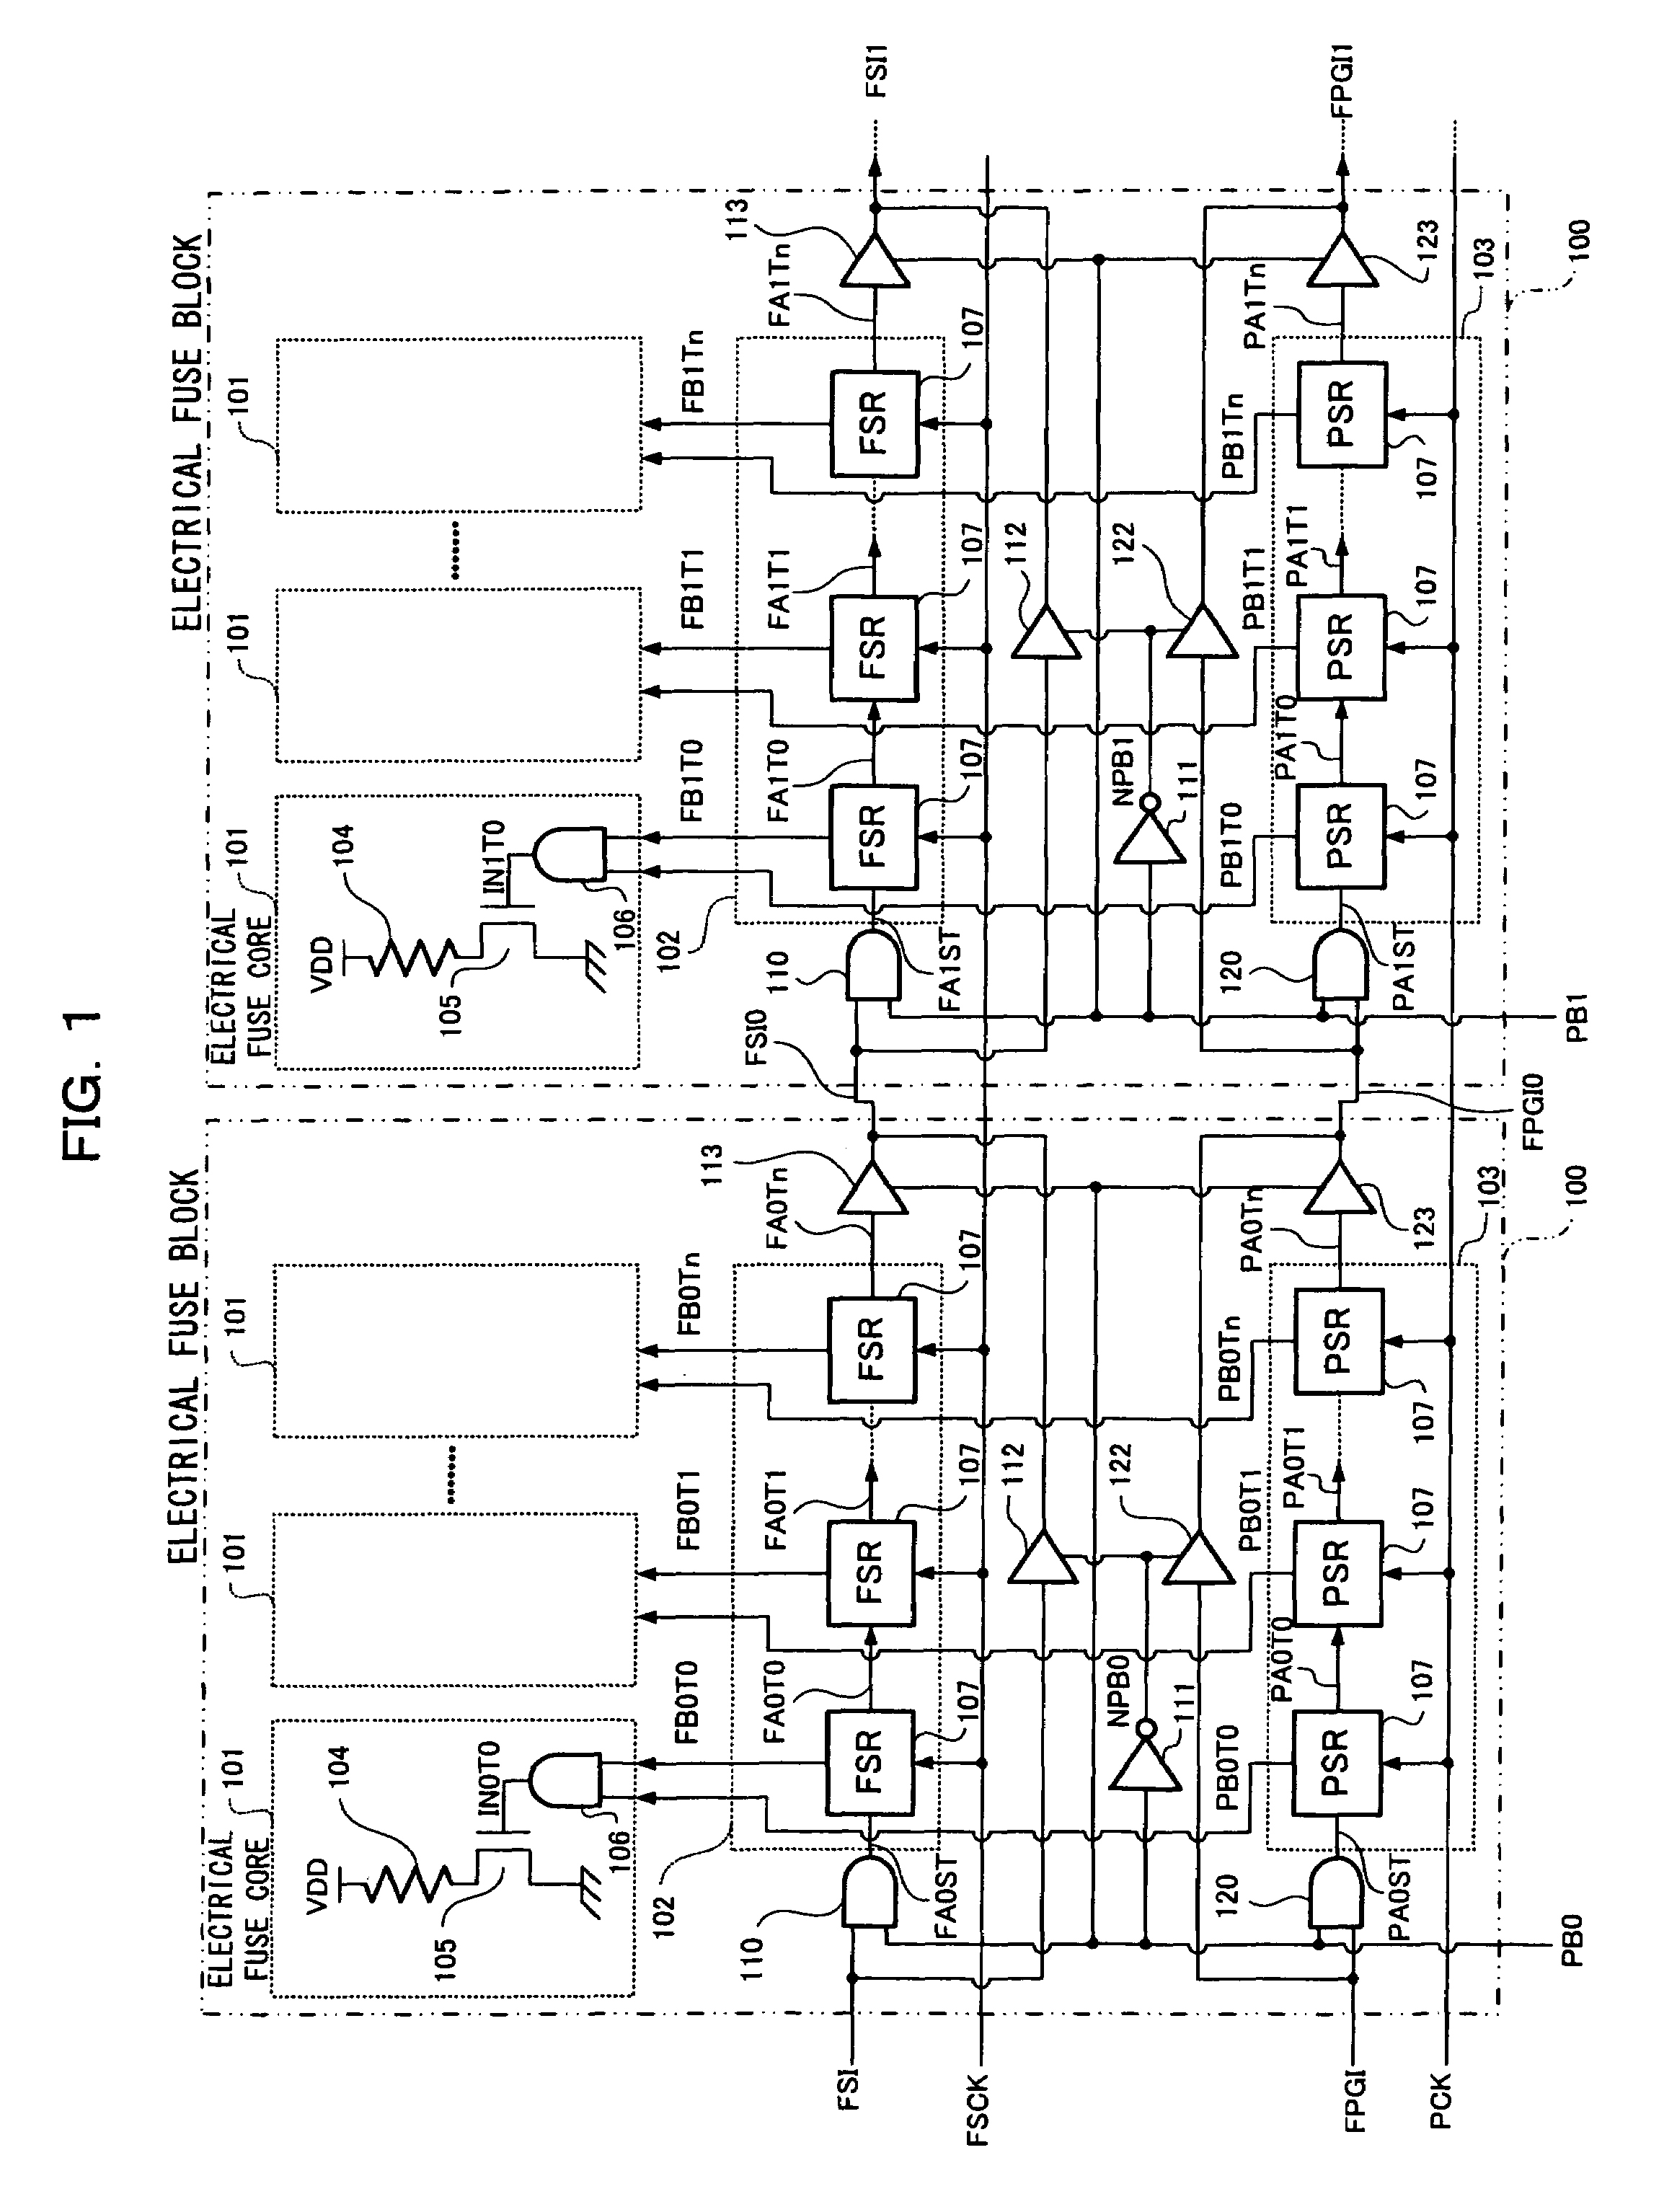 Semiconductor storage device including electrical fuse module